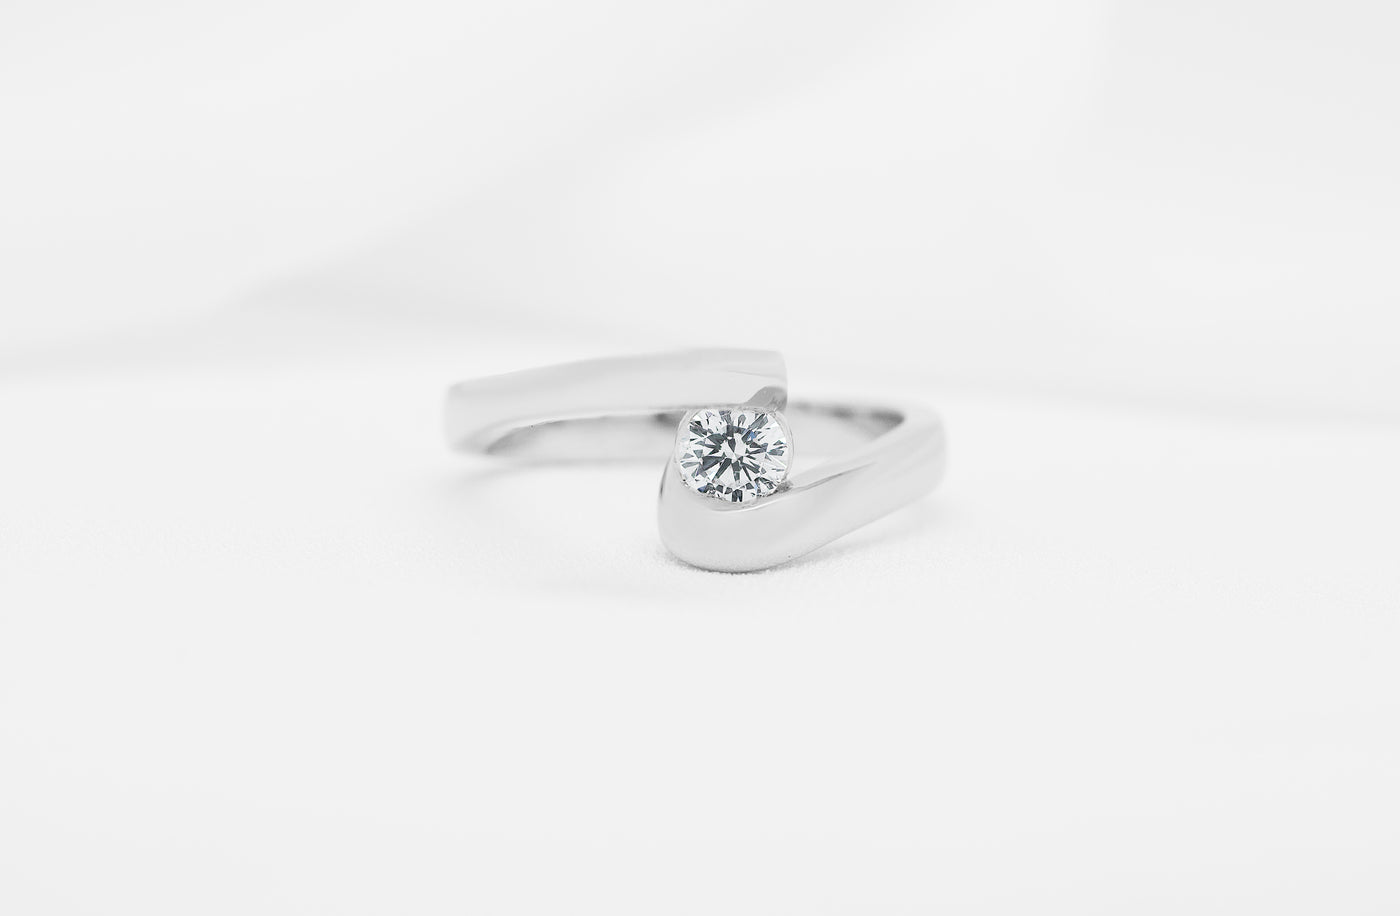 Inspired Collection, Diamond Ring, Jewellery, Jewelry, ring design, contemporary, modern, specialist, Platinum, 18k, 18ct, white gold, round brilliant cut, spiral, brilliant cut, tension setting, ribbon, ribbond, spike, peak, ready to go, ready to ship, 0.30ct, G colour, color, VS2 clarity